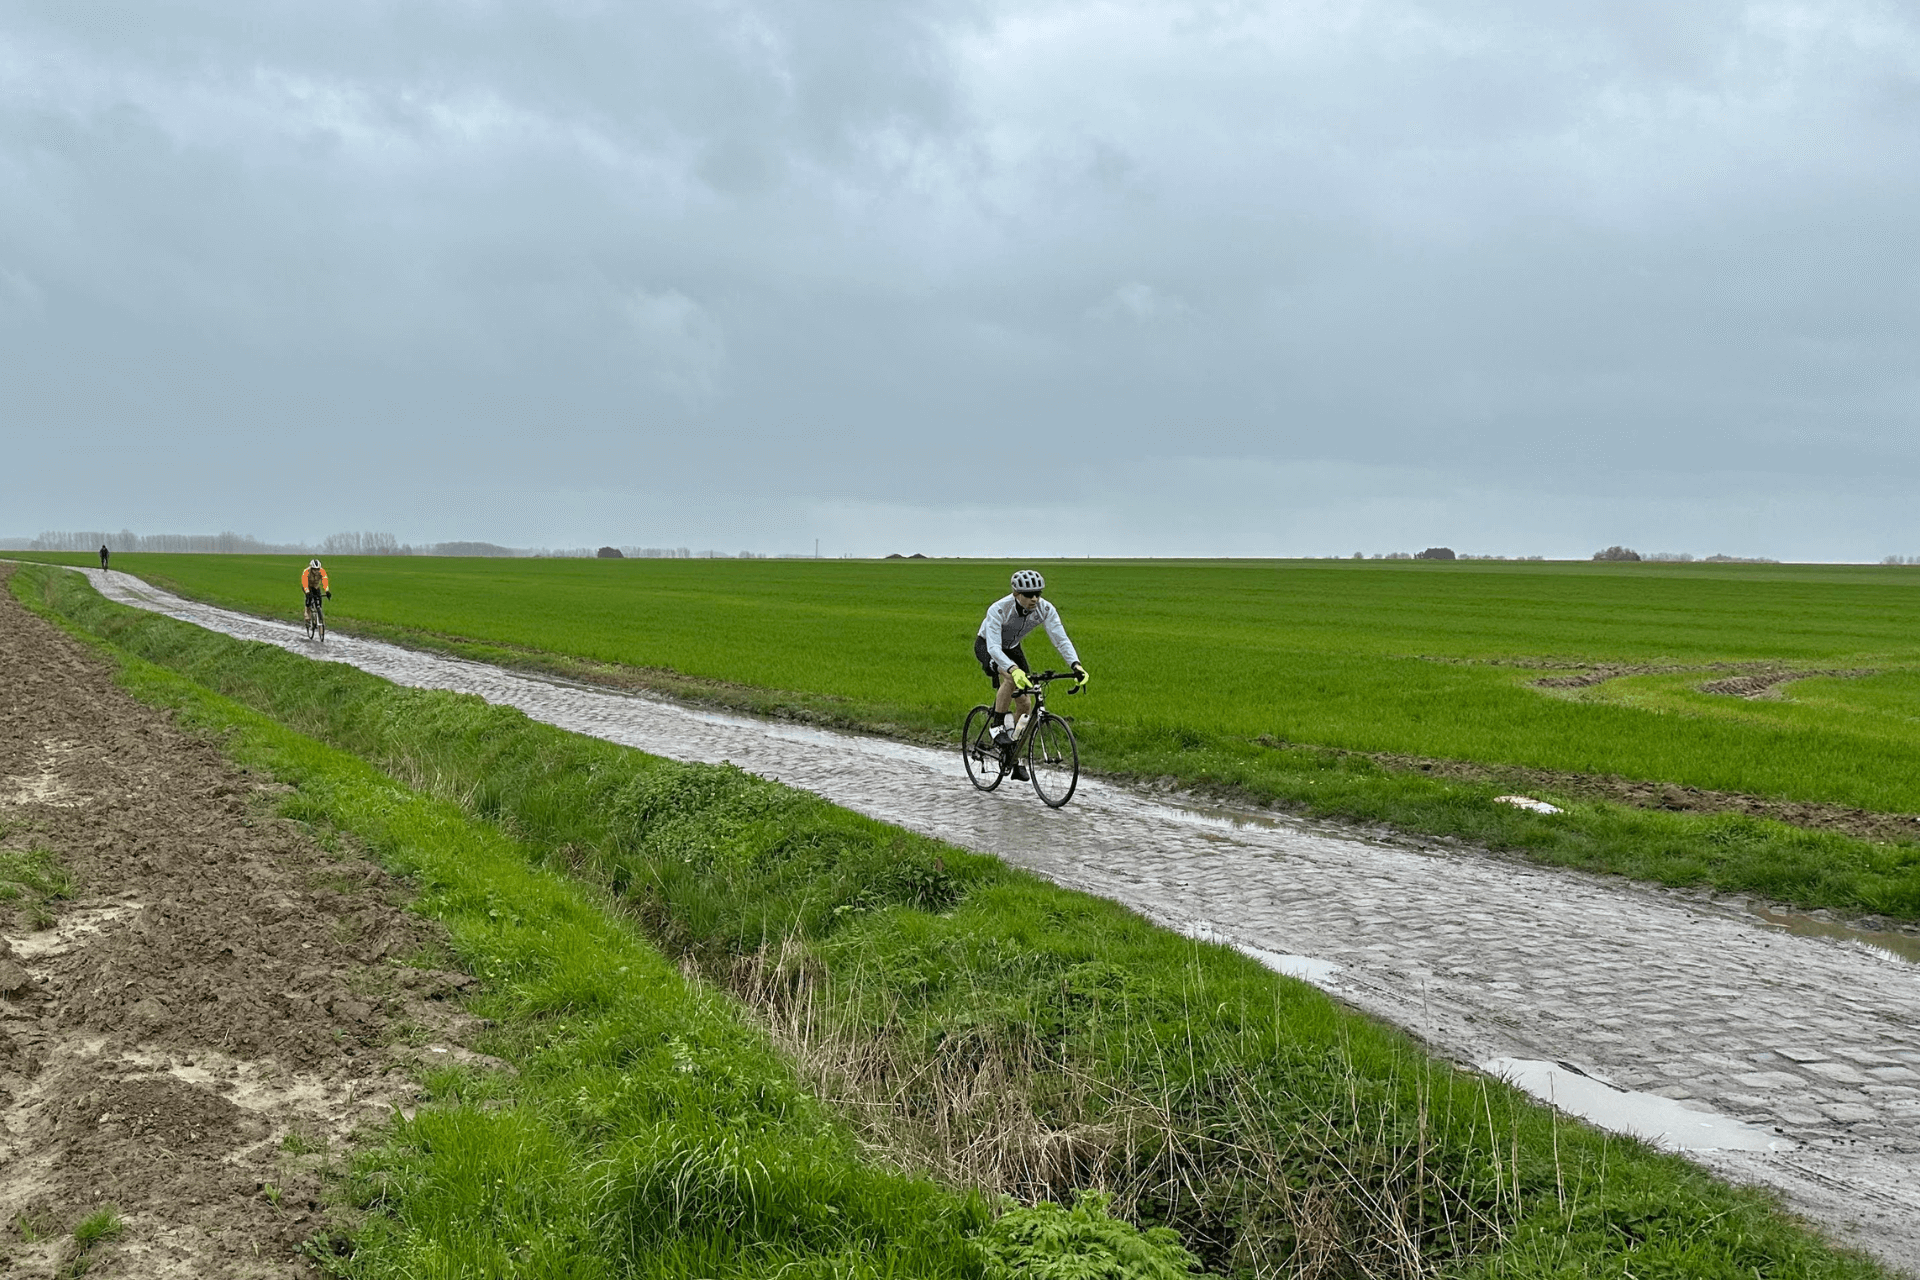 There is a deep green field with a narrow cobbled road in the foreground. Three cyclists, spaced roughly 25 metres apart, ride drop bar road bikes over the cobbles